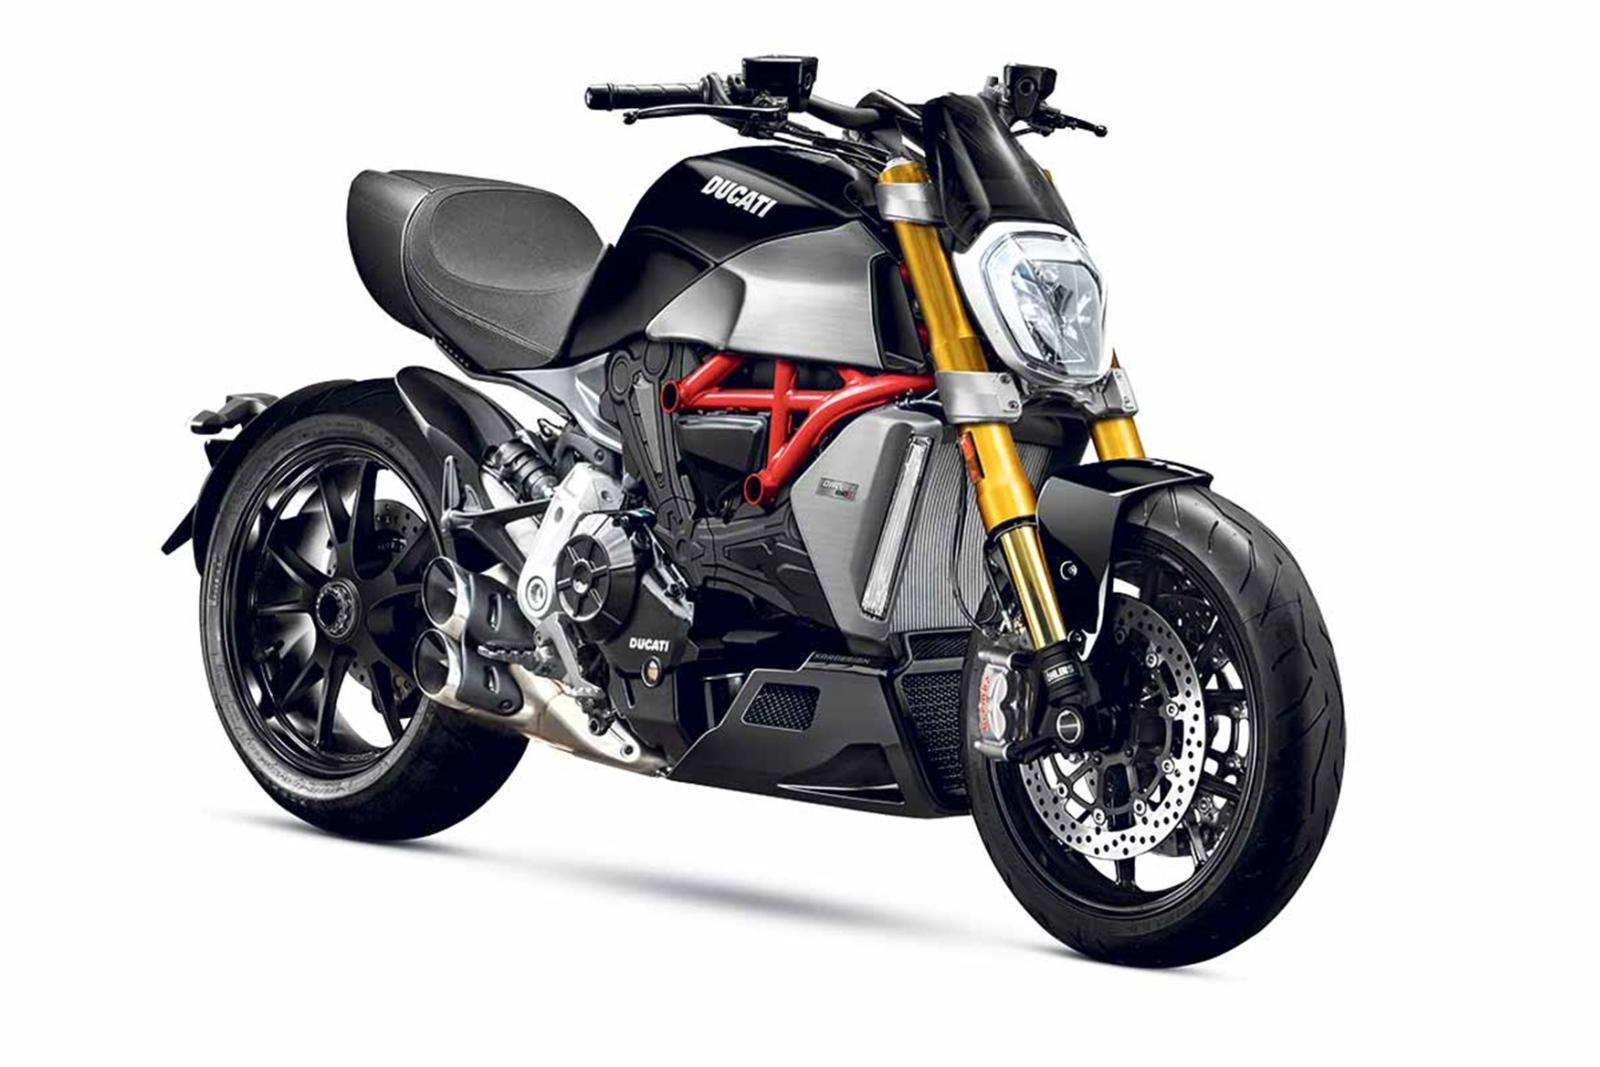 Ducati Diavel 1260 S To Be 'Most Advanced Super Cruiser' In